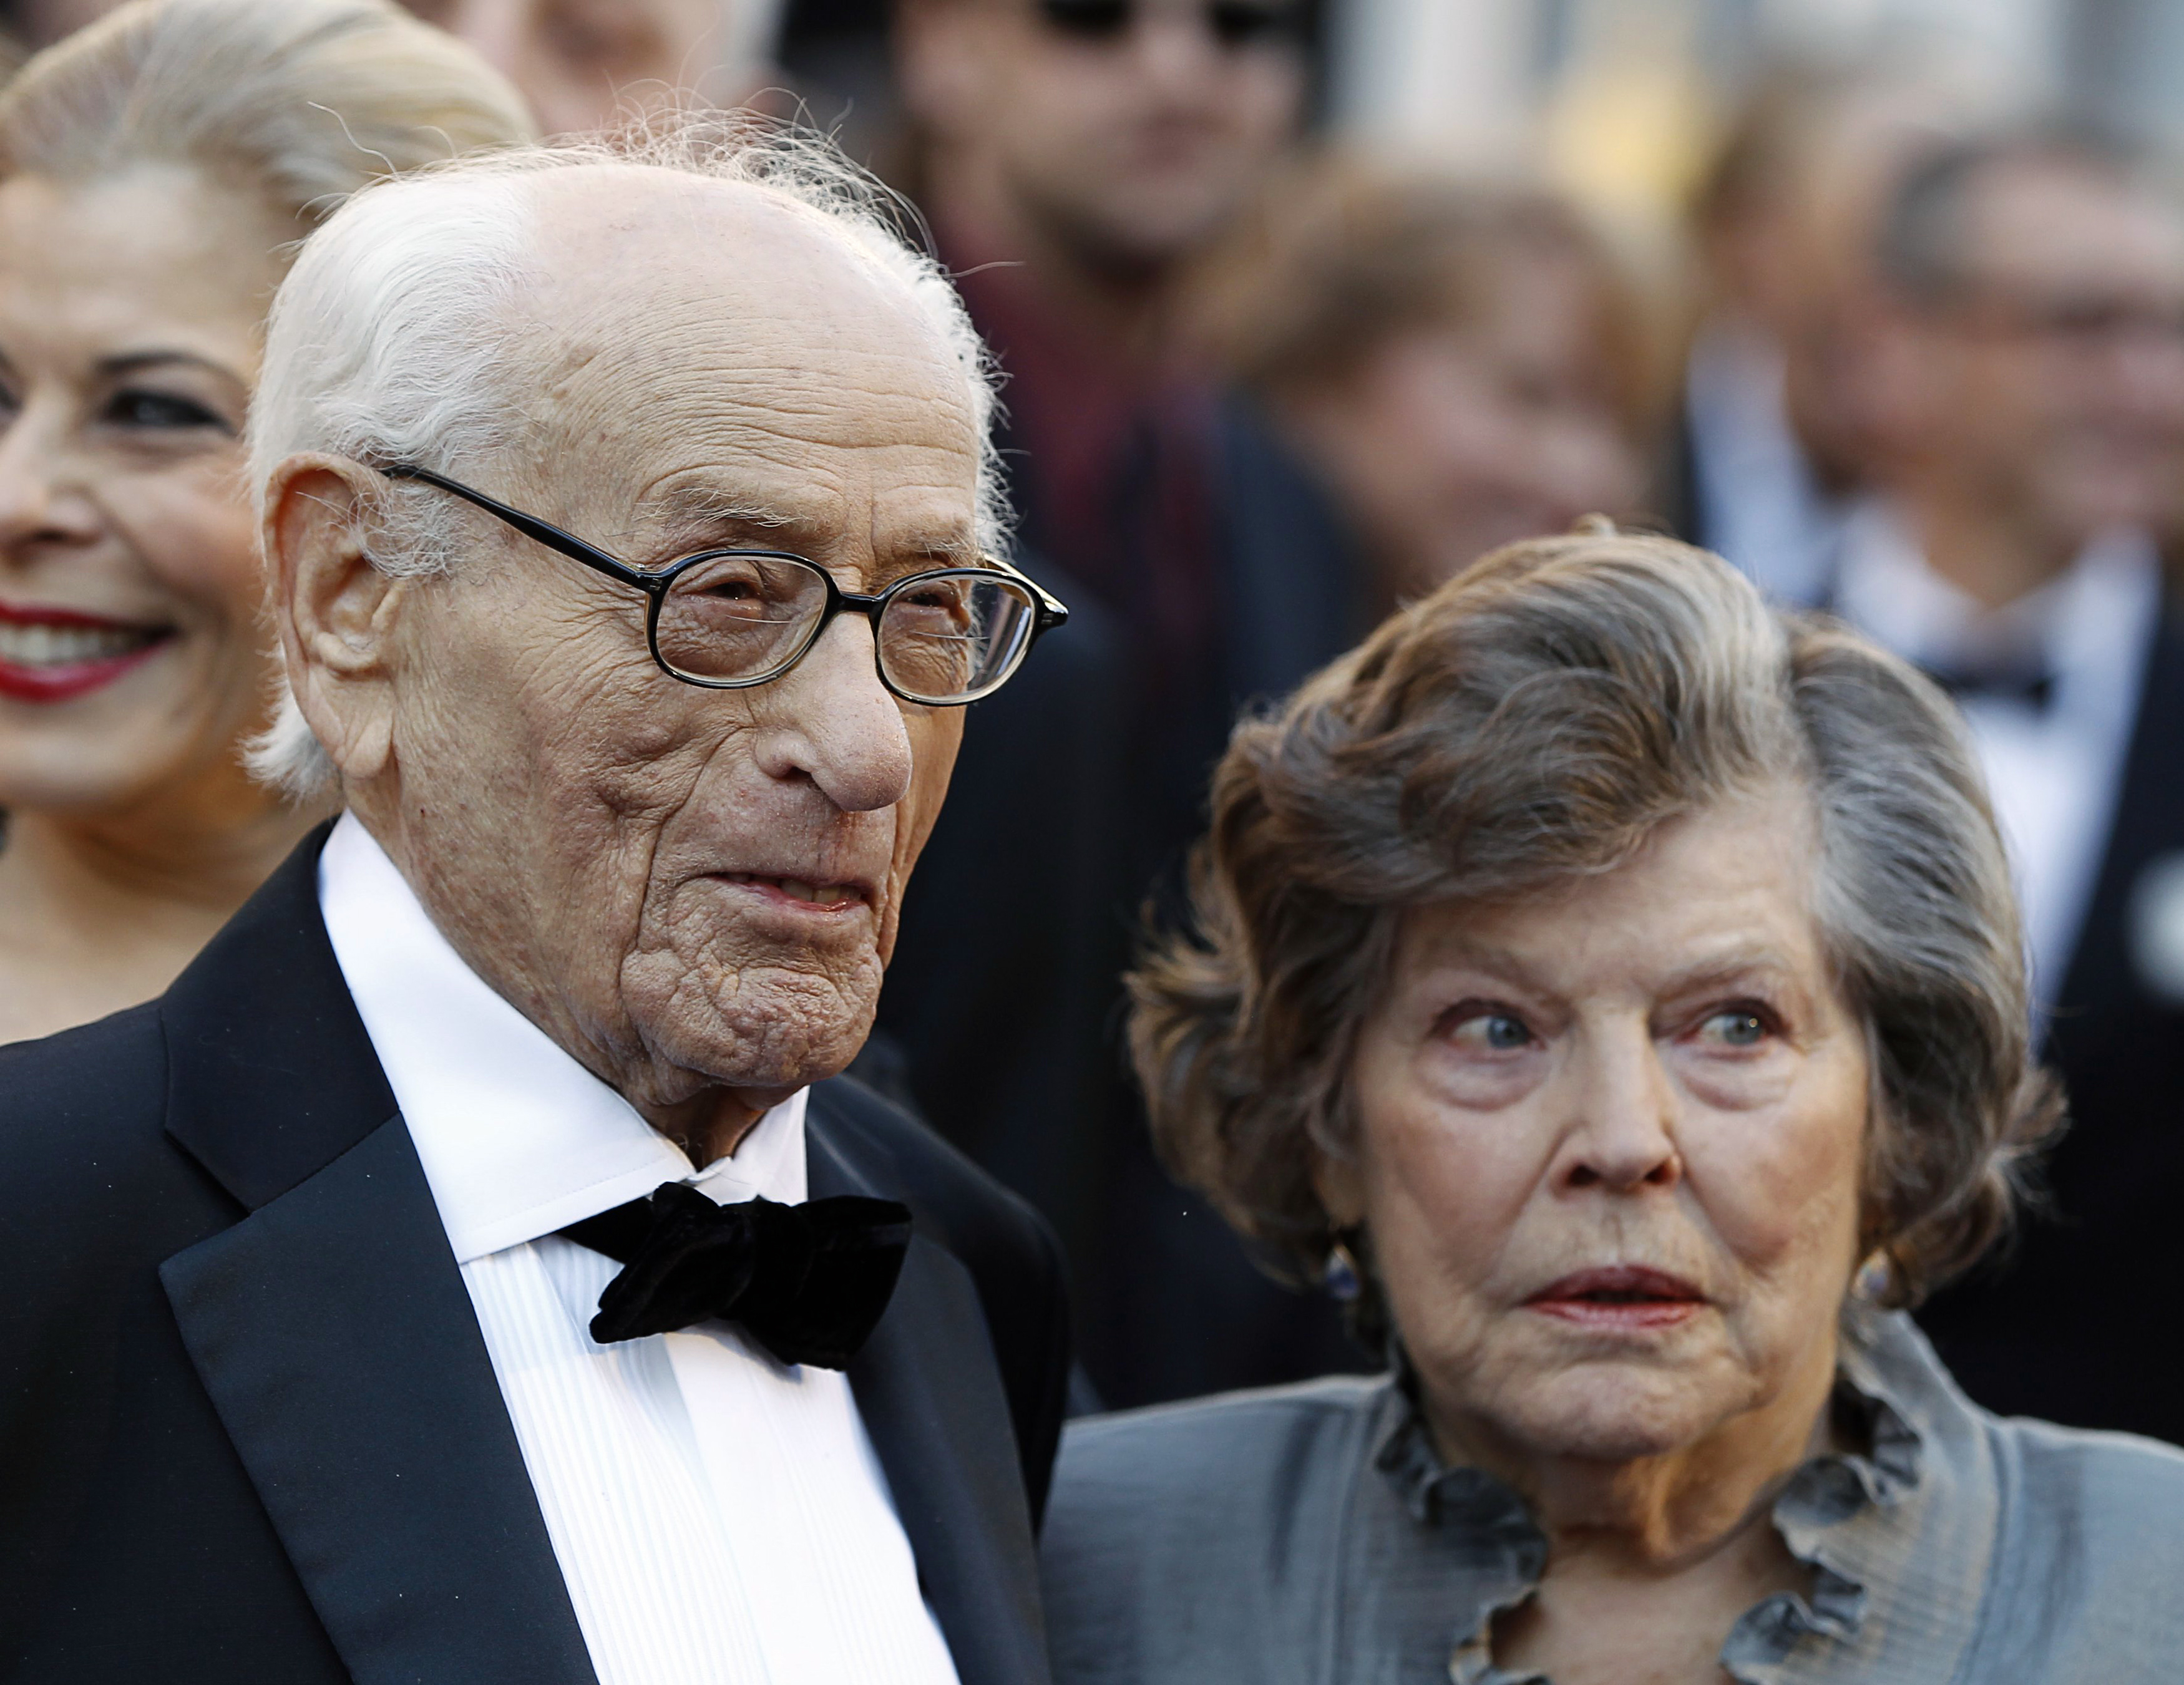 Honorary Oscar recipient actor Eli Wallach and wife Anne Jackson arrive at the 83rd Academy Awards in Los Angeles on Feb. 27, 2011 (Lucas Jackson—Reuters)